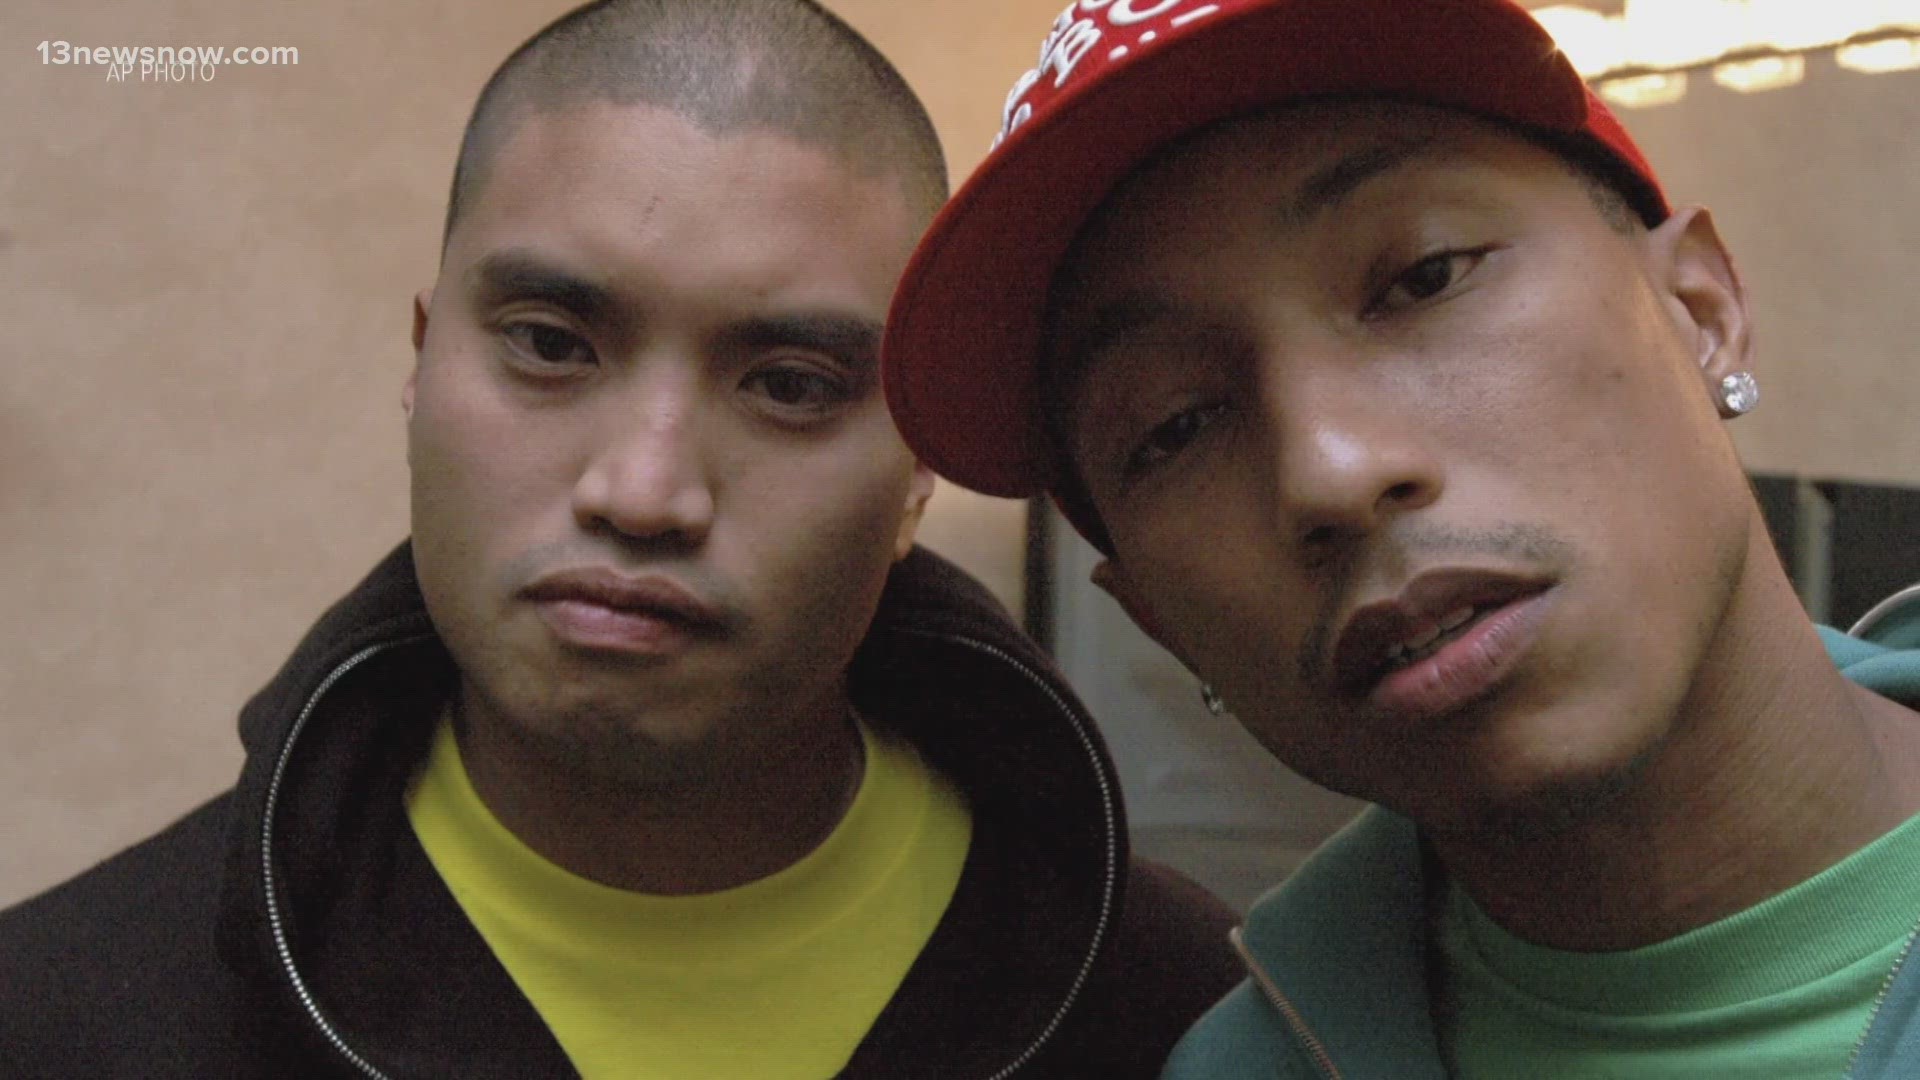 A legal complaint filed by Chad Hugo claims Pharrell Williams filed to obtain trademarks for "The Neptunes" in his name only and did not include Hugo as co-owner.